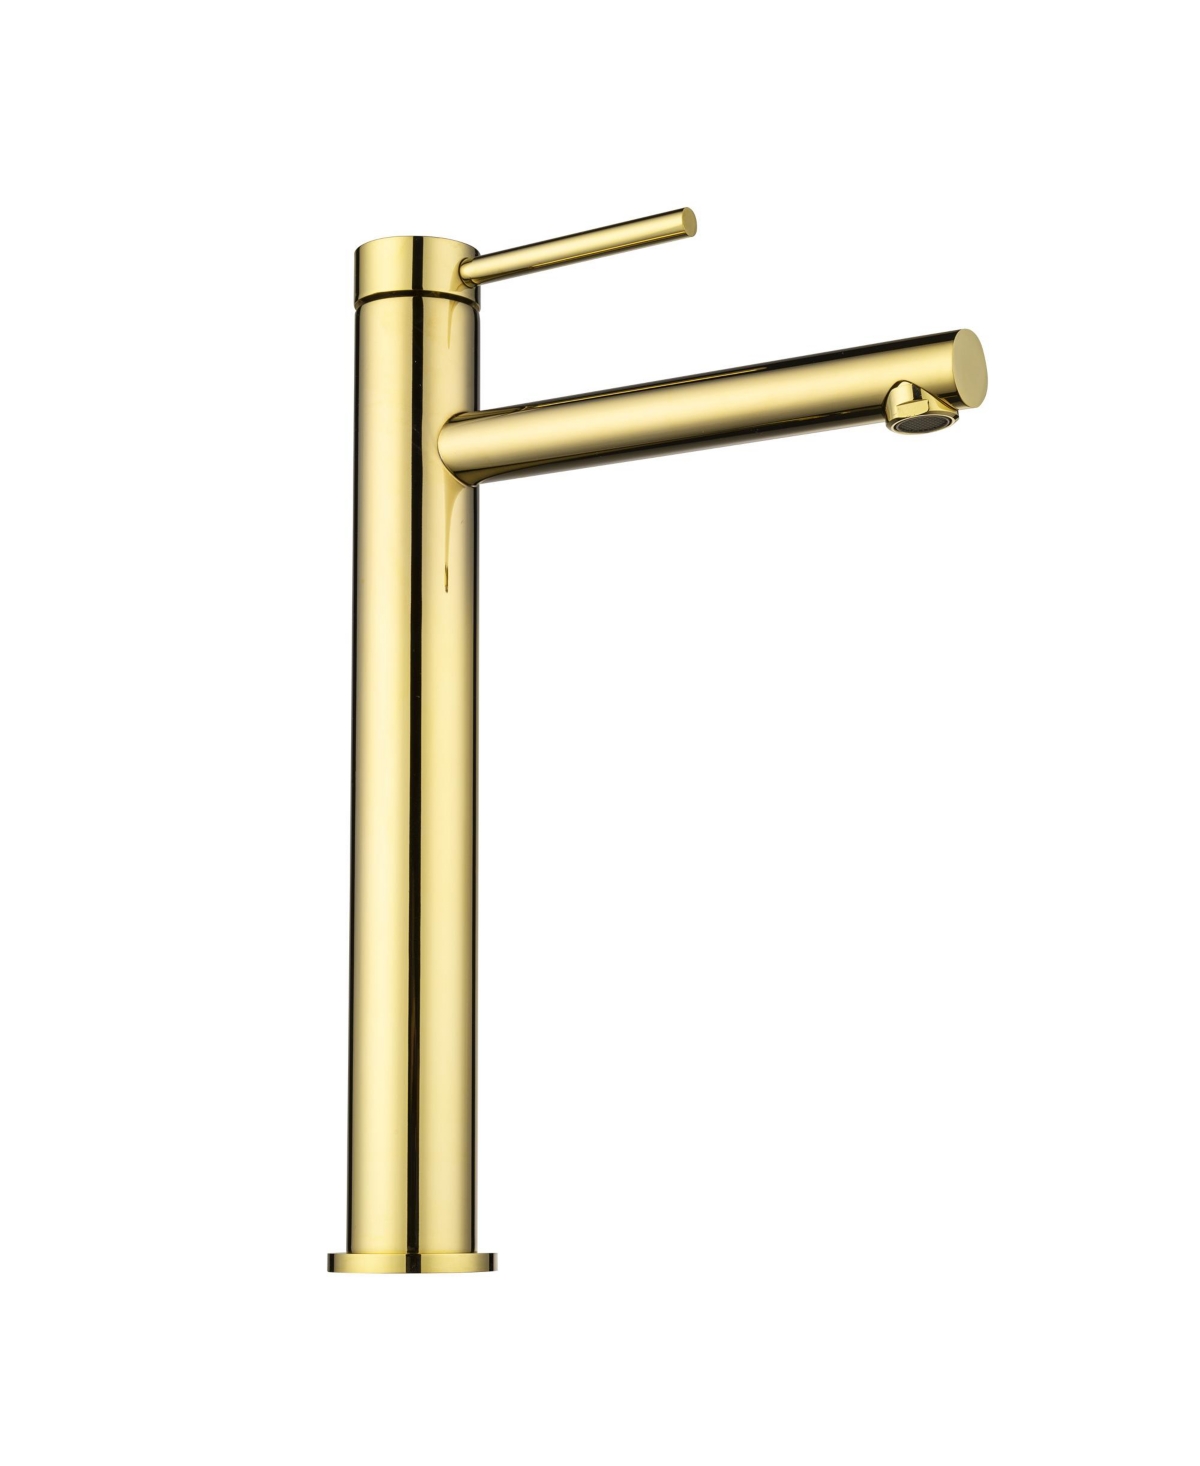 Gold Bathroom Vessel Sink Faucet Single Handle/Hole 8" Tall Vanity Mixer Tap - Brushed gold